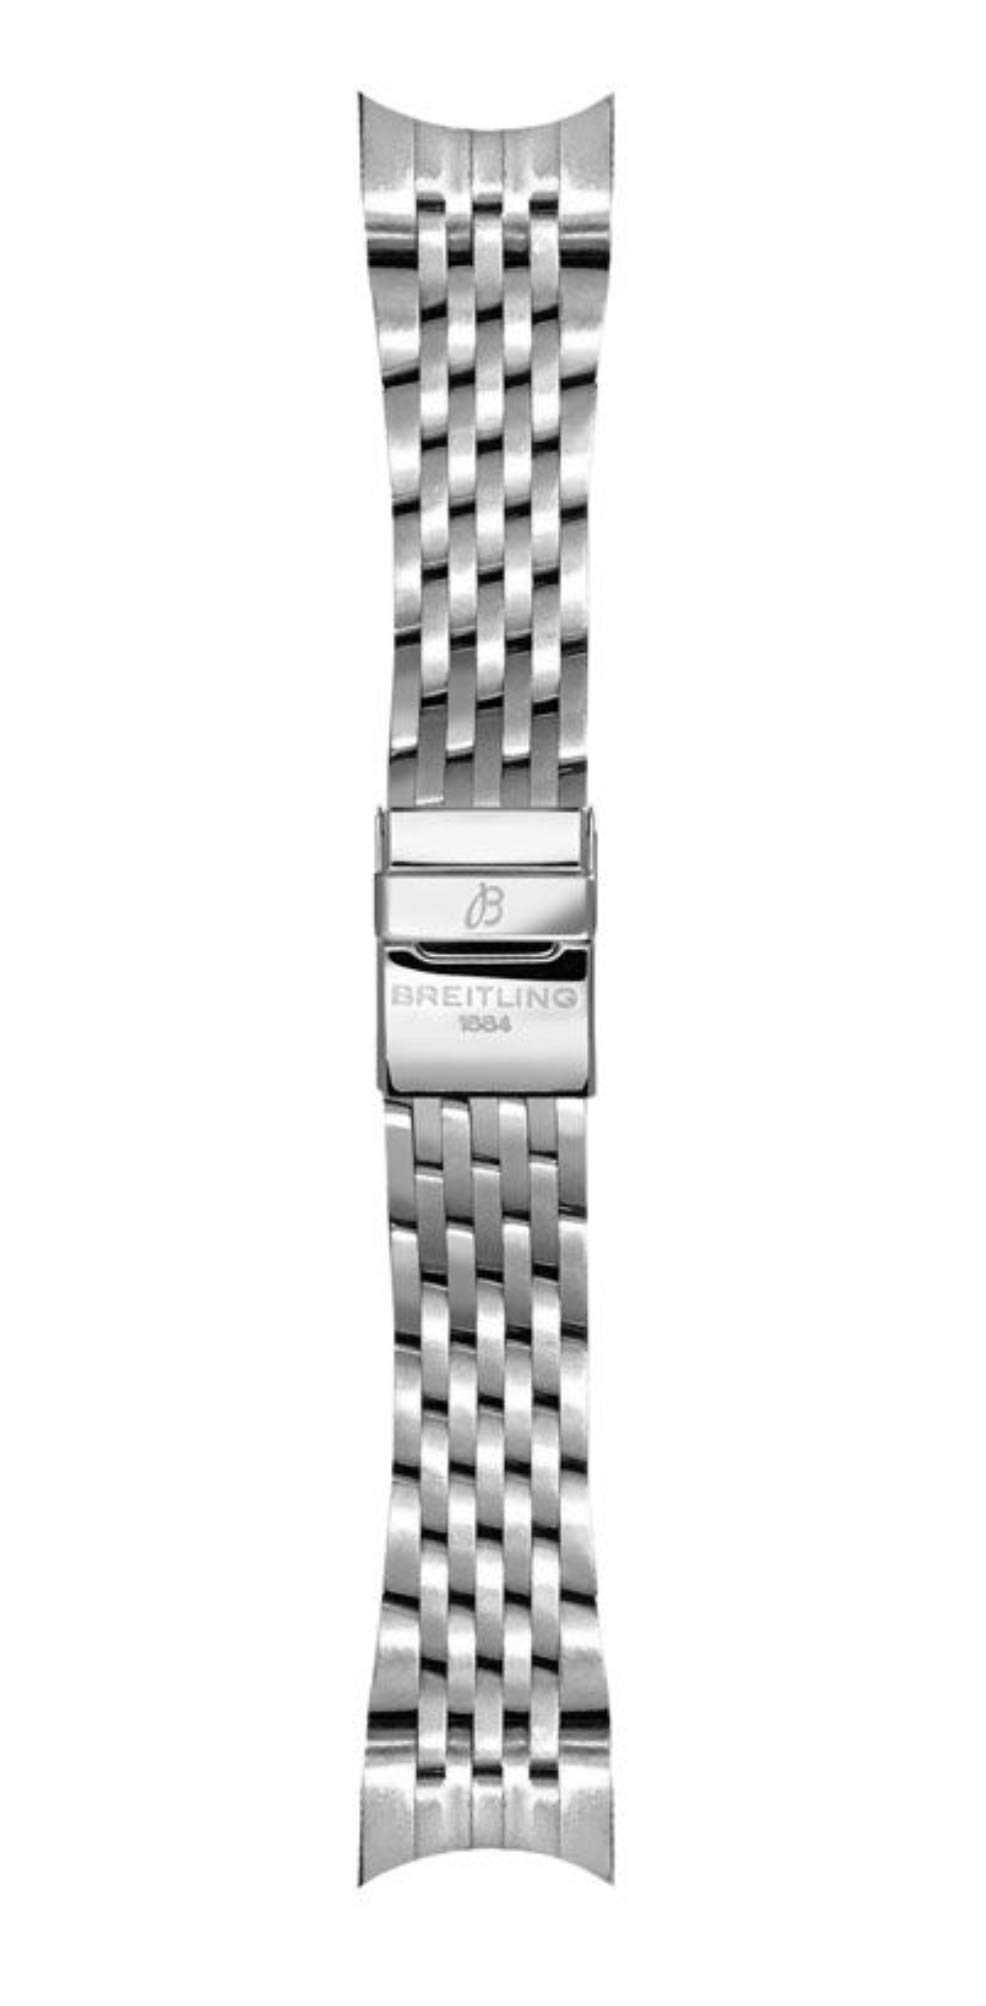 Breitling 22mm Polished Steel Bracelet 452A, Fits Breitling Premier B01 Chronograph 42 Watches